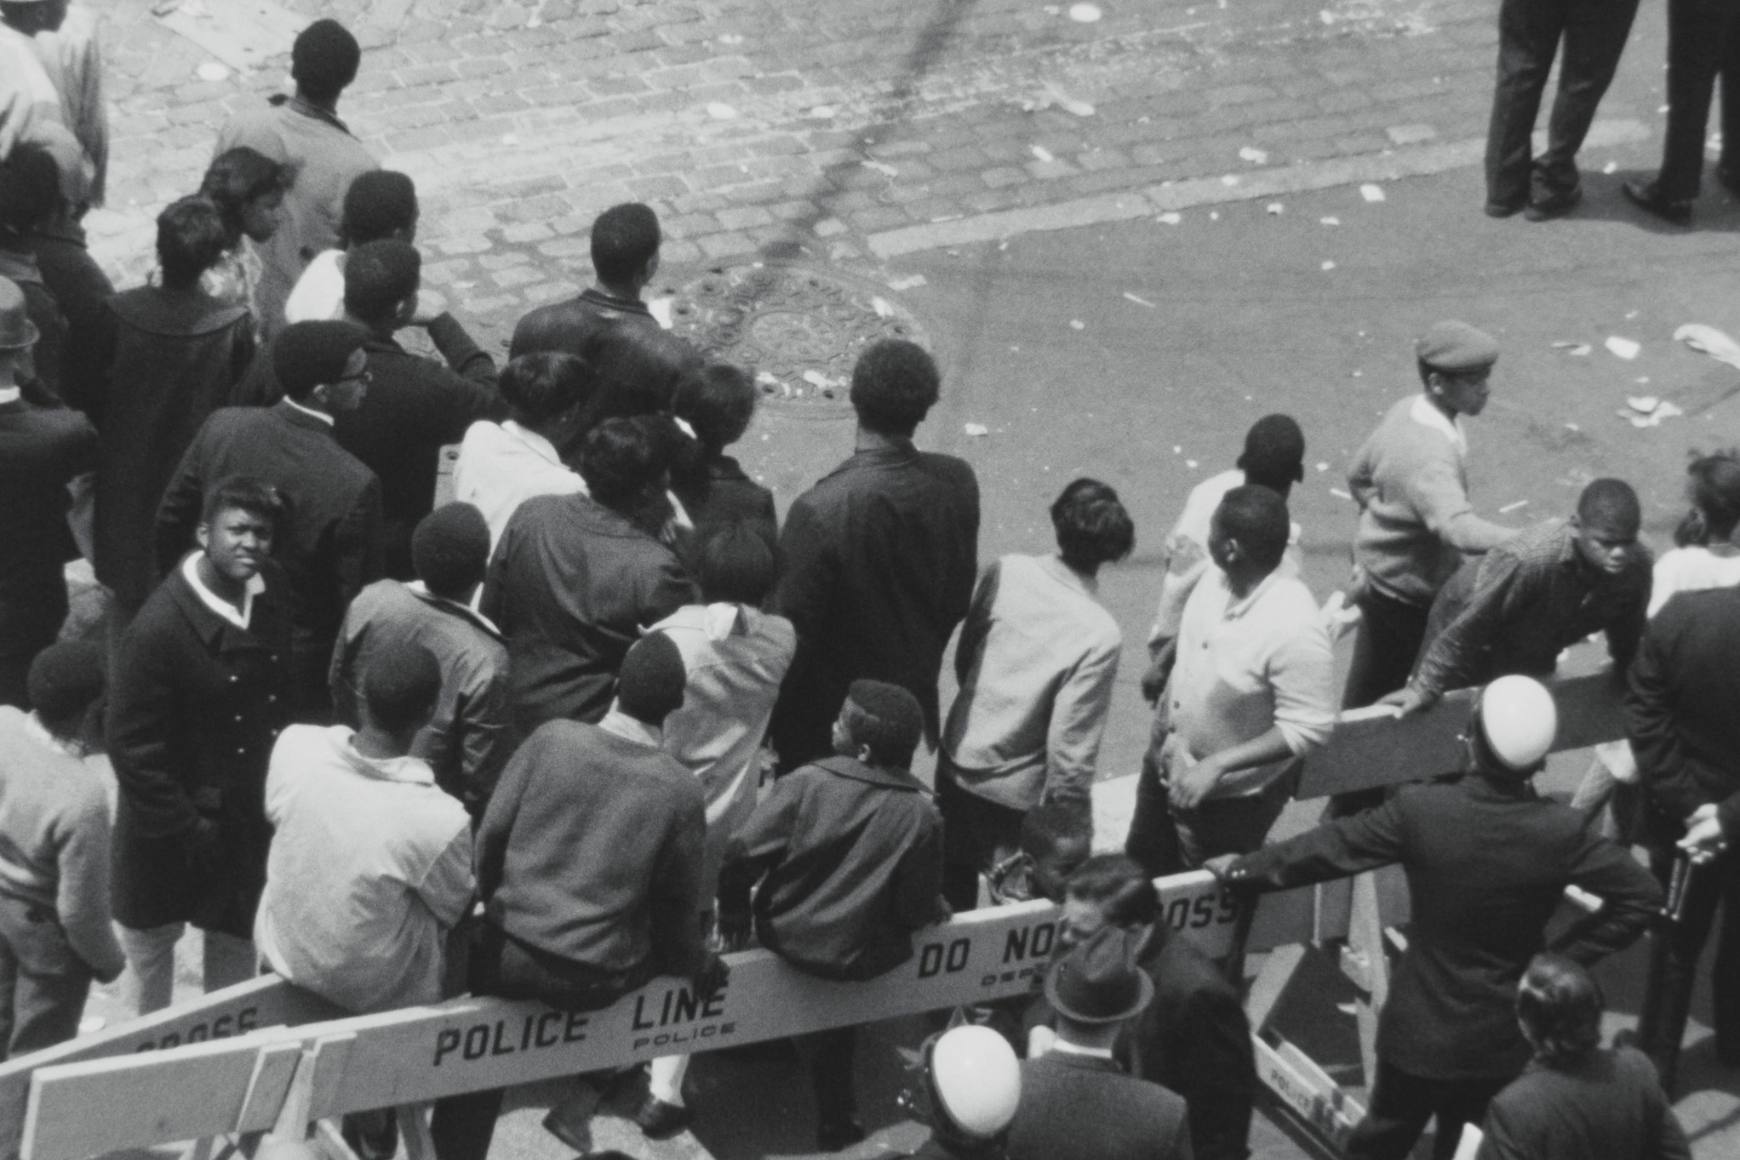 A black and white birdseye view of a group of people stand in the street. Police barricades delineate the space. 